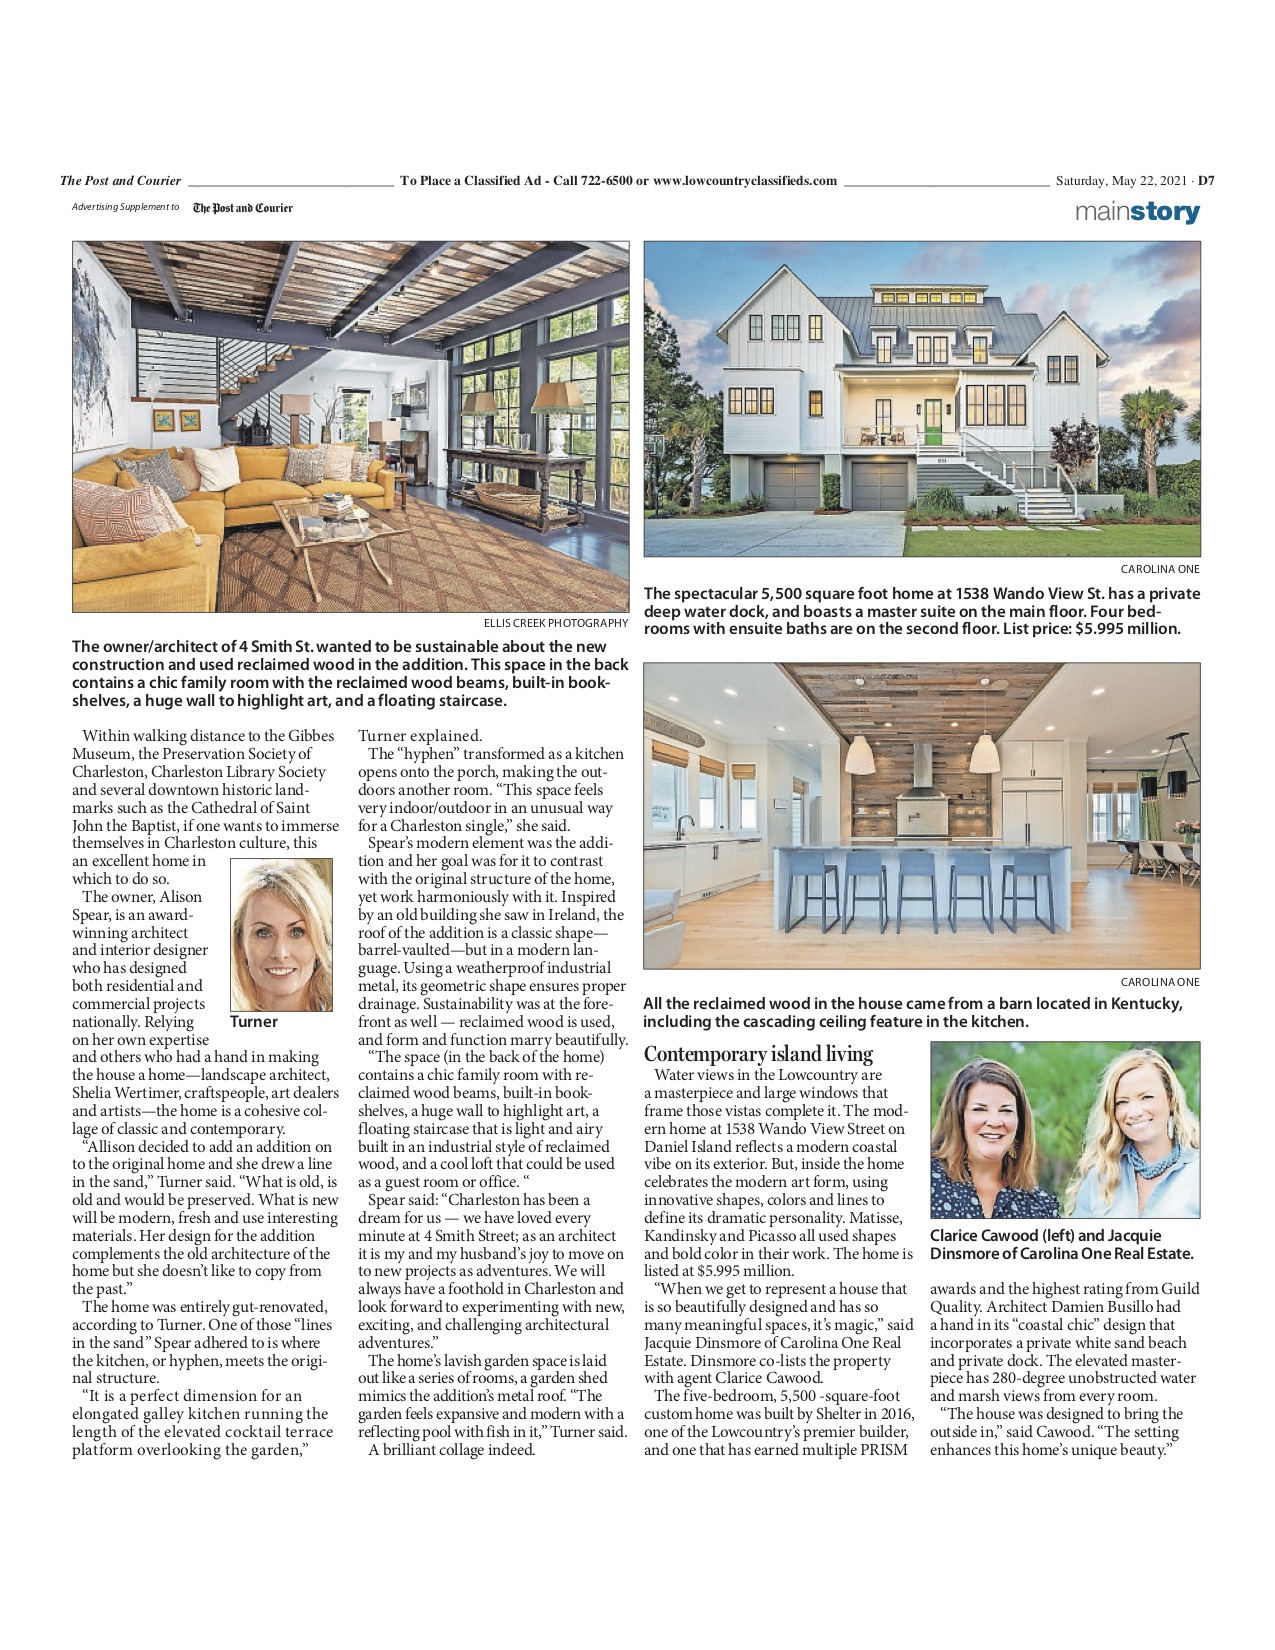 Post and Courier Artful Homes Issue